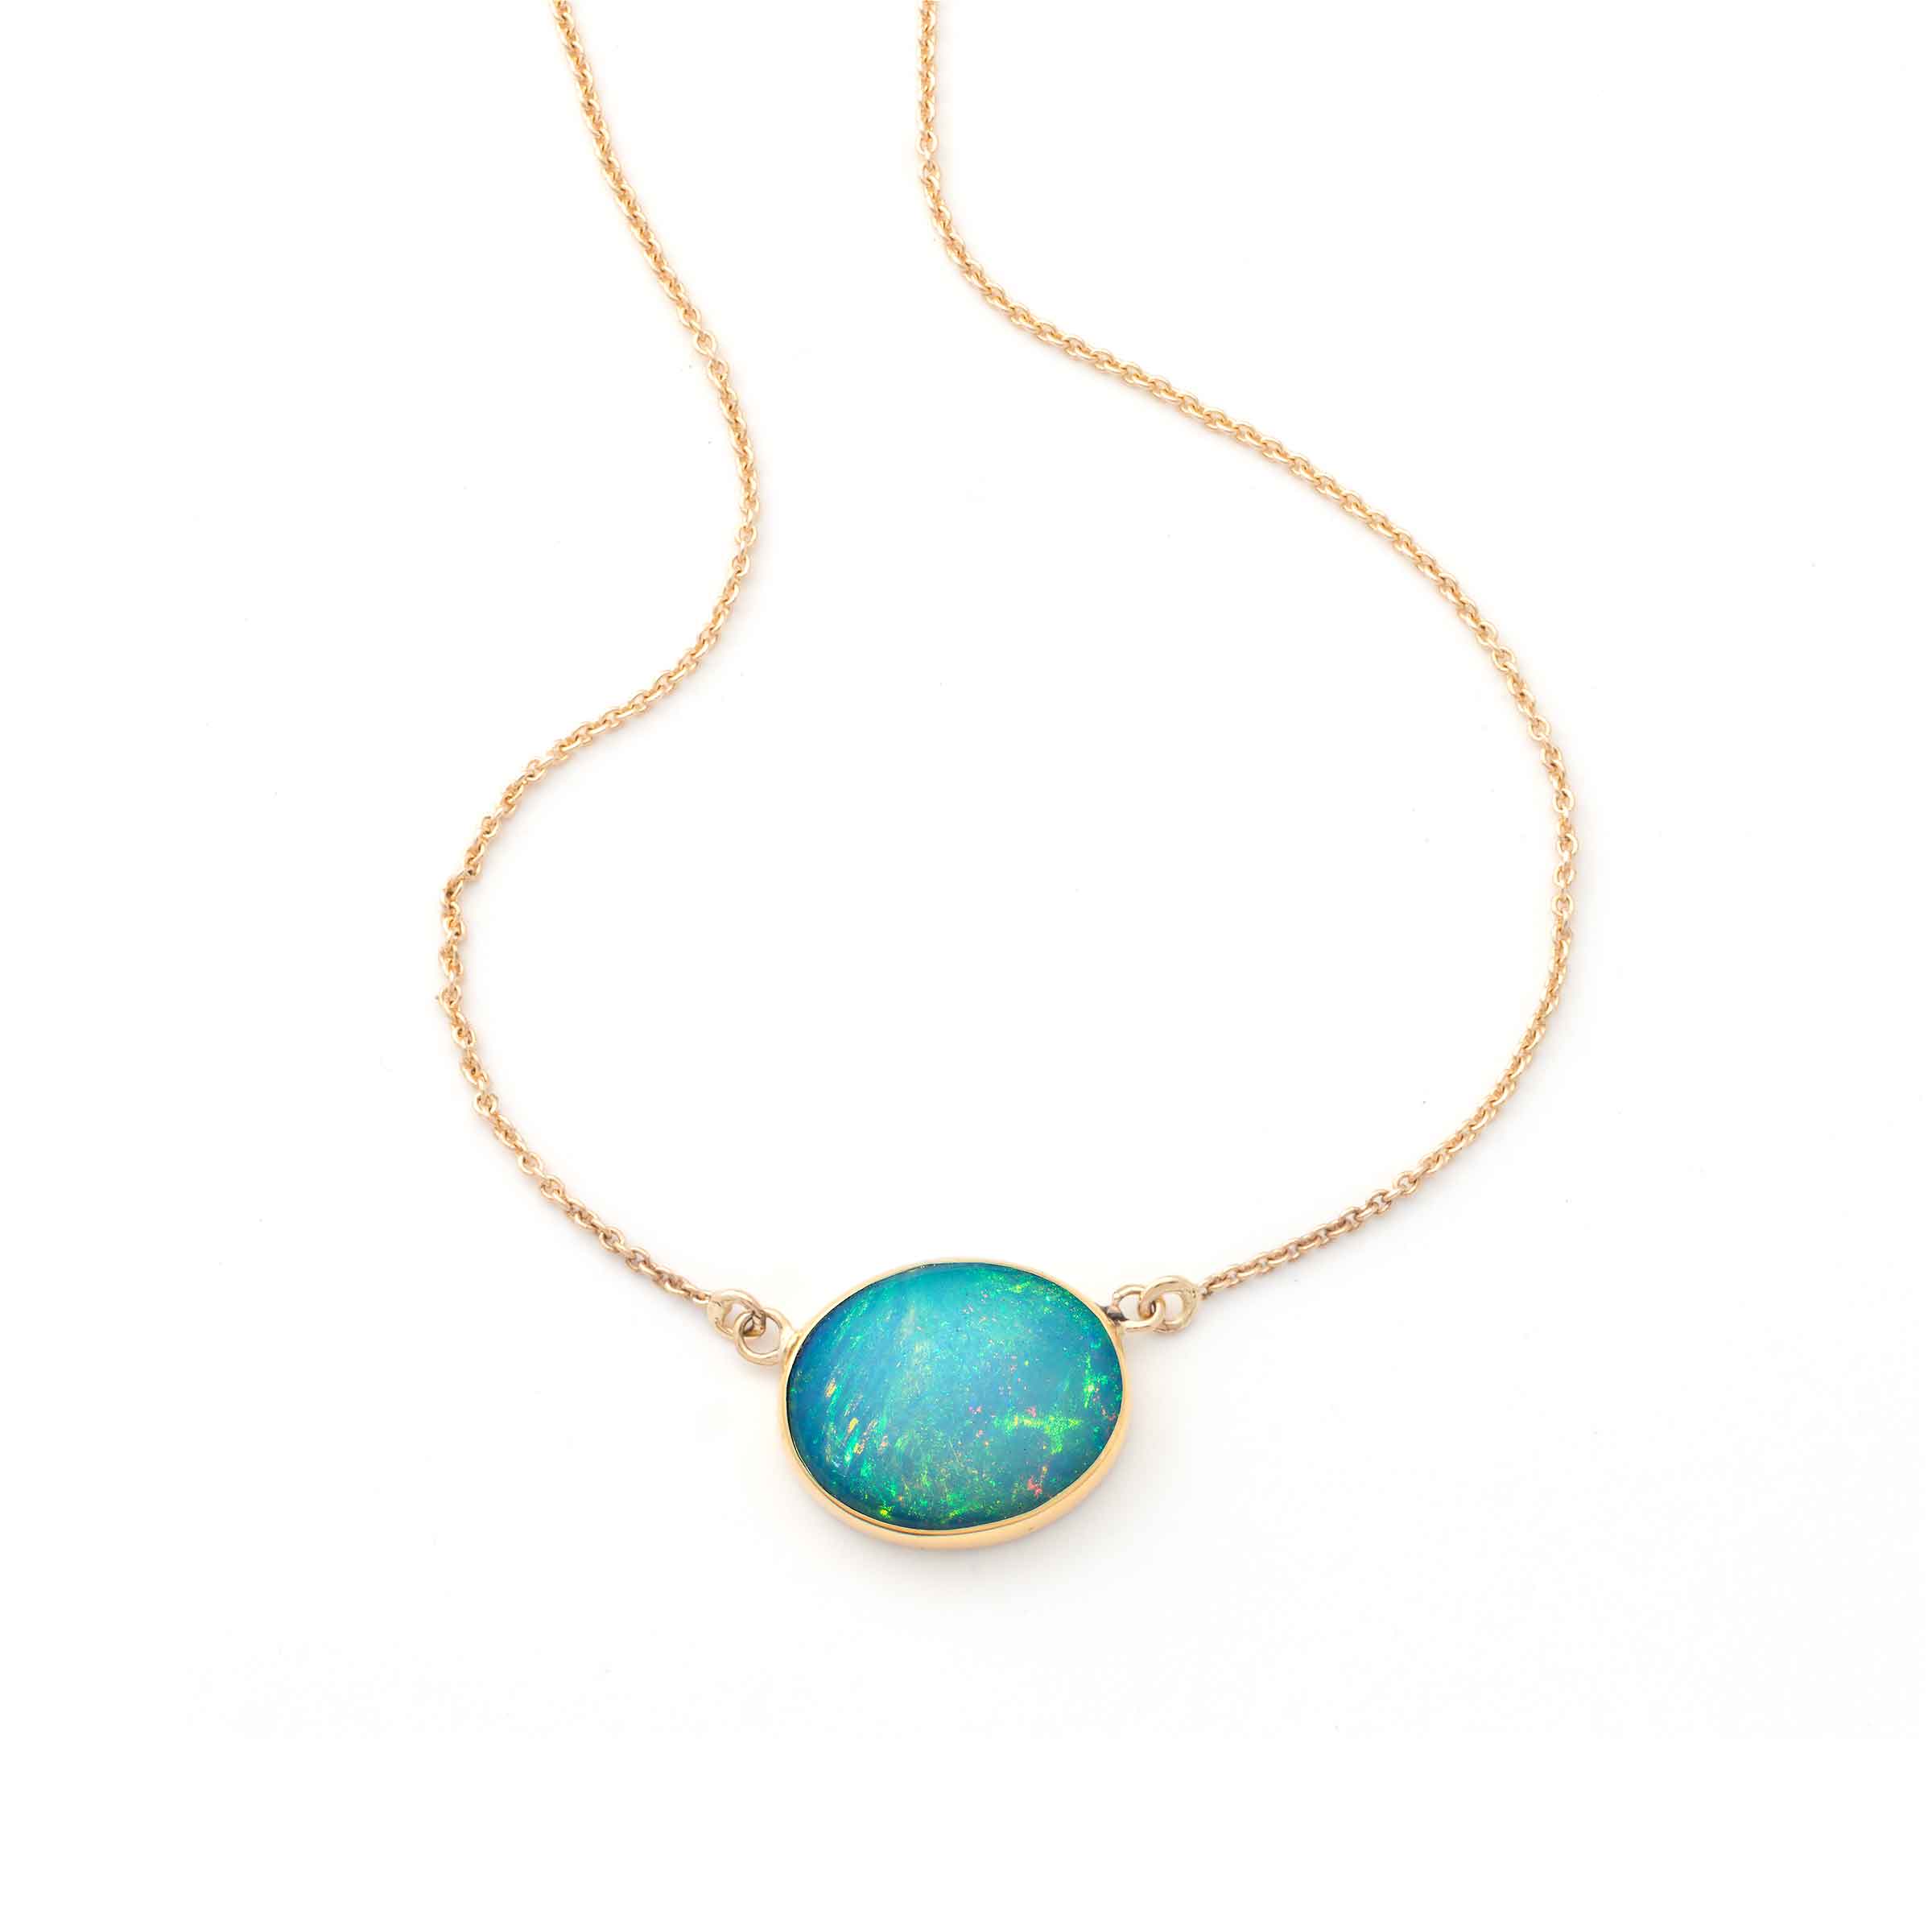 AMANDA PEARL // Frost Blue Faceted Ethiopian Opal Necklace